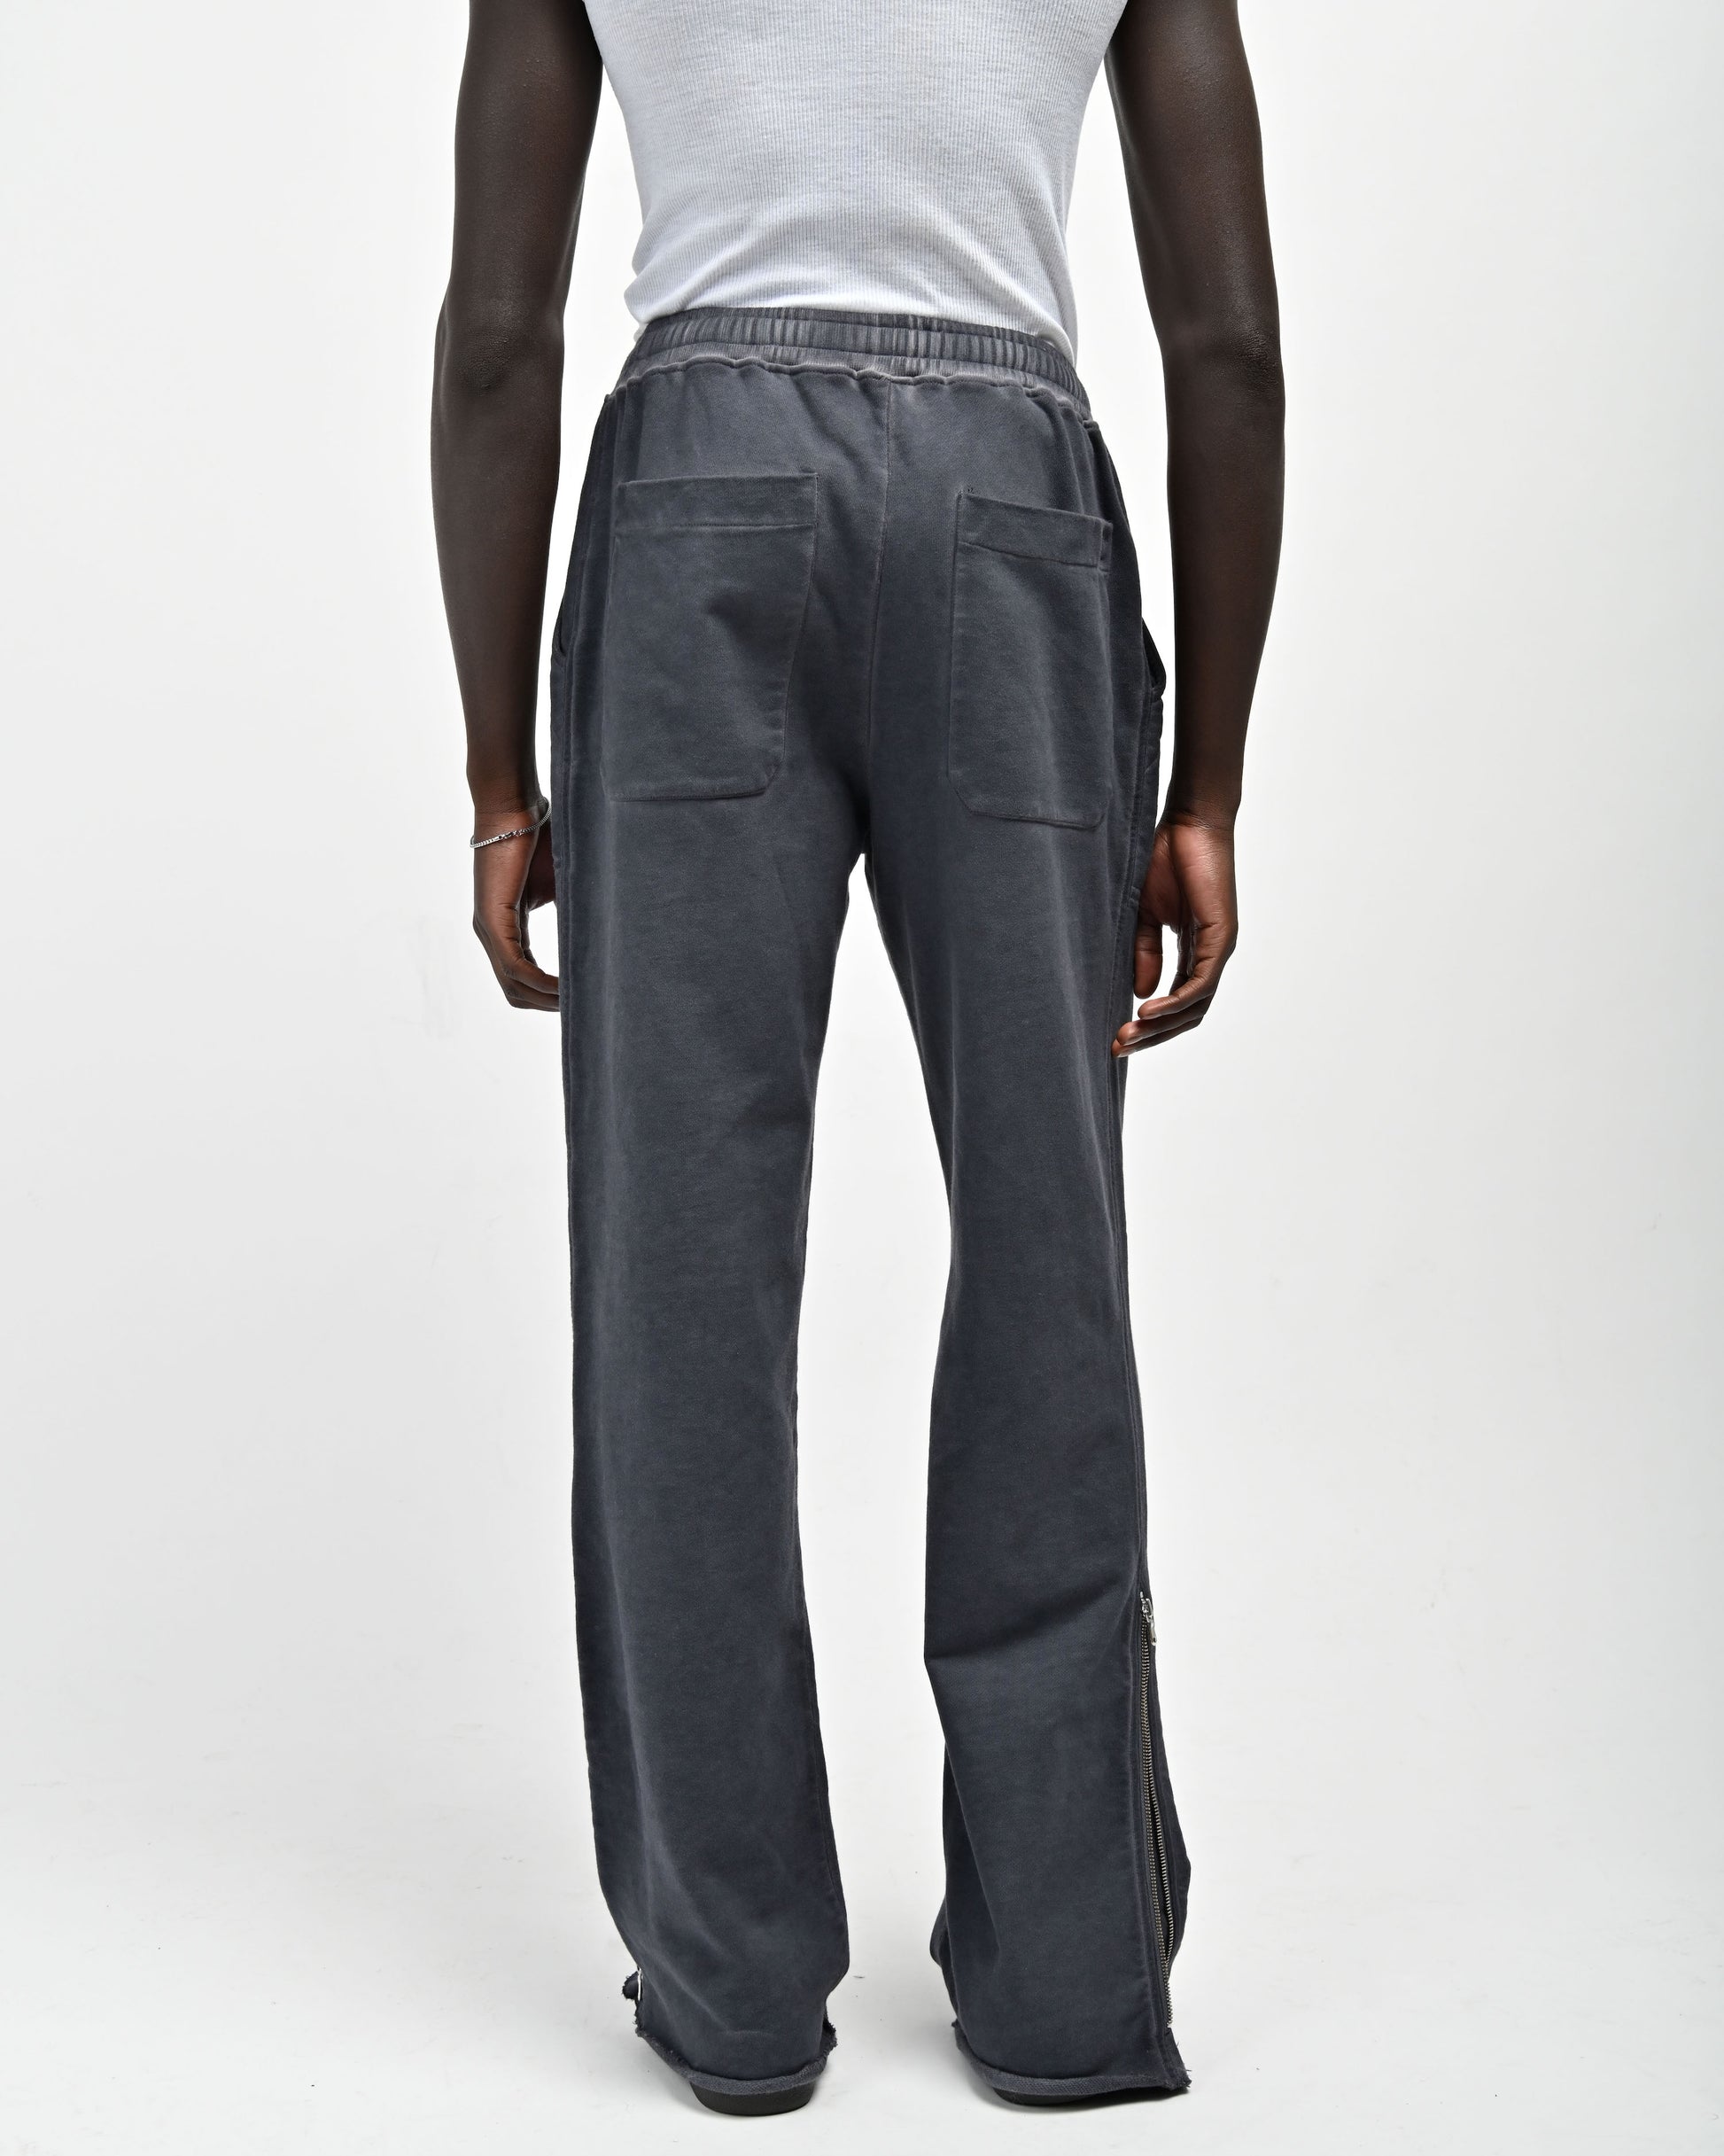 Back View of Man in Allora Track Pants in color Indigo Blue